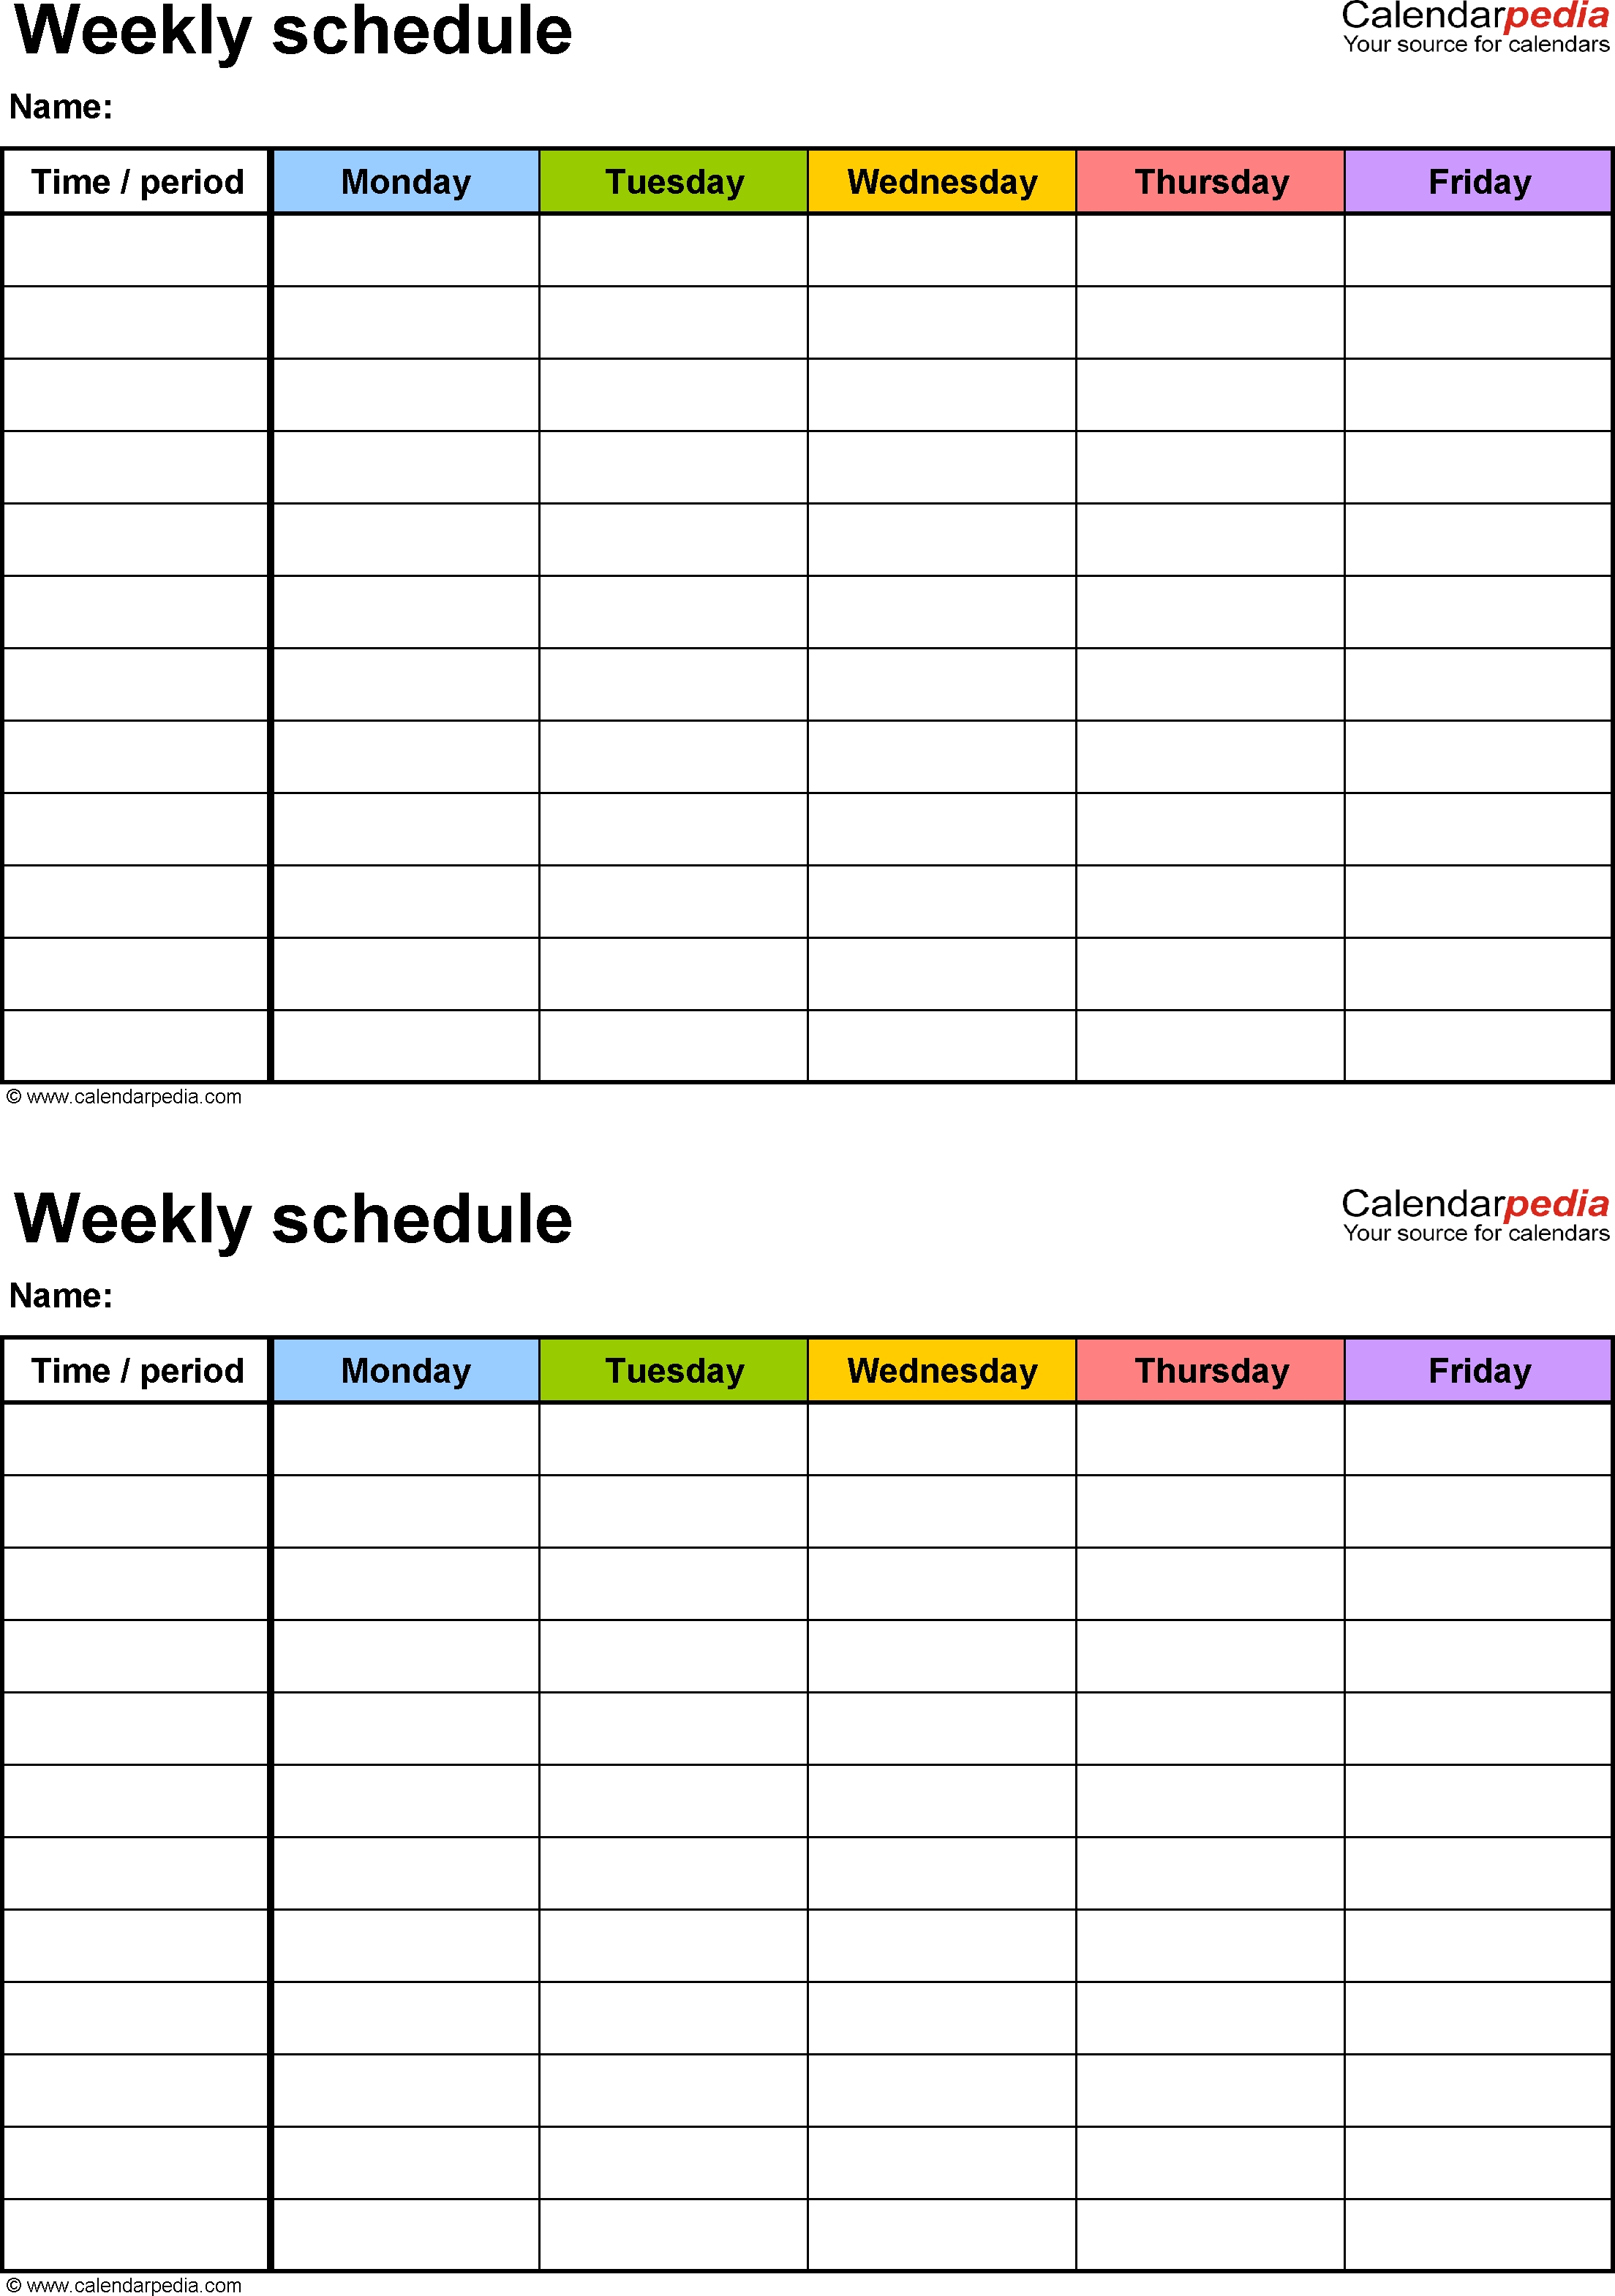 Free Weekly Schedule Templates For Word - 18 Templates Printable 5 Day Monthly Calendar